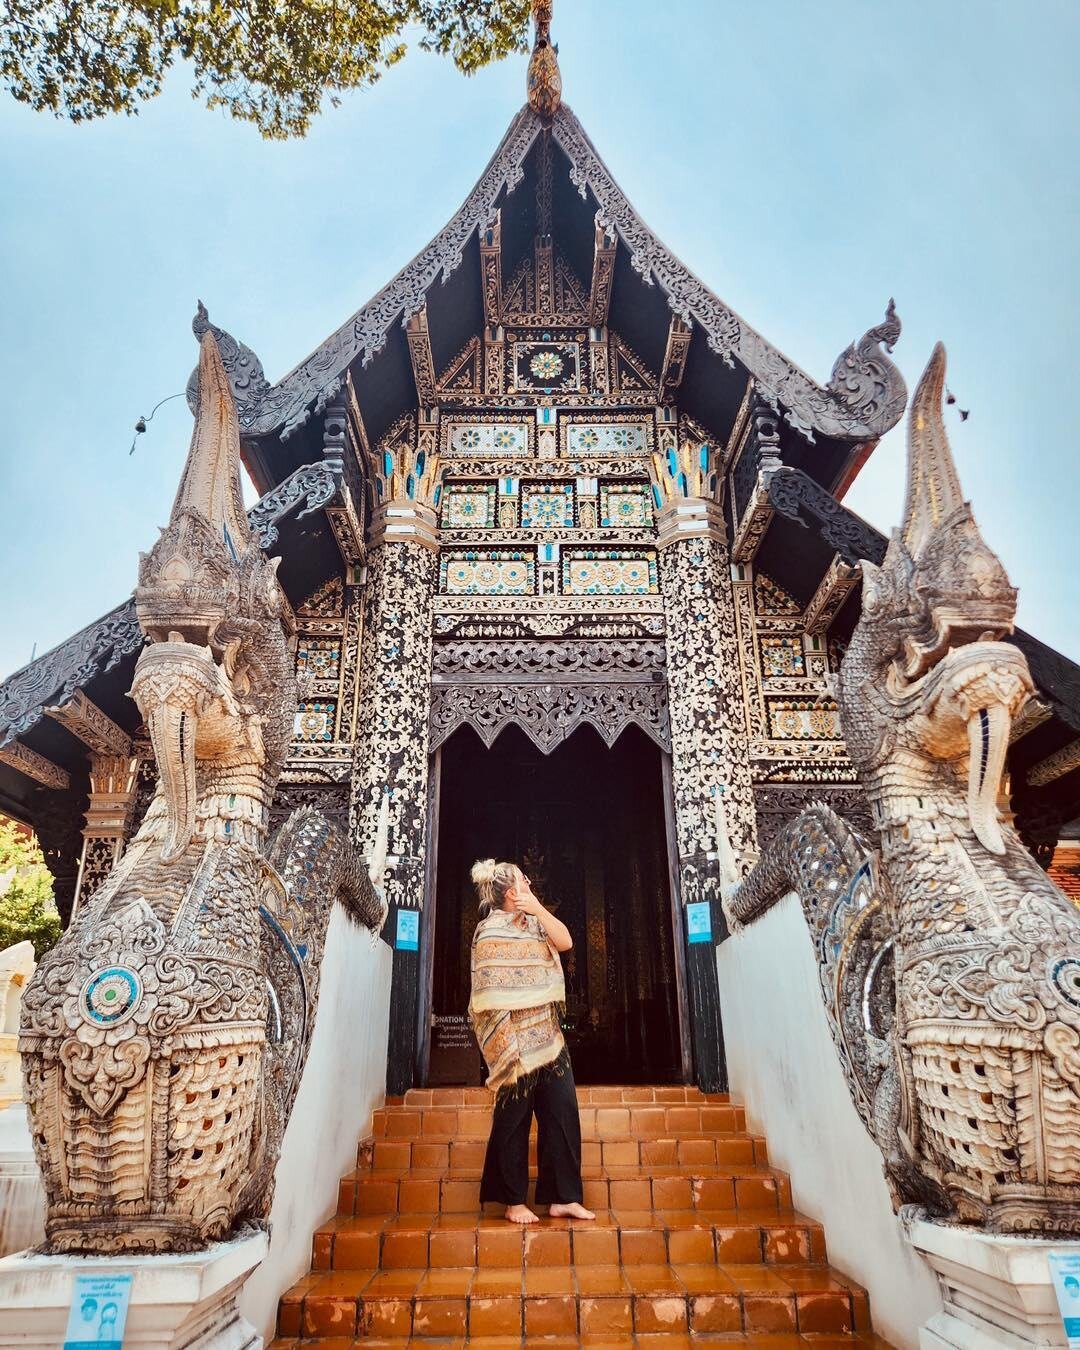 Chiang Mai is a city located in the north of Thailand. This city is best known for its mountains, elephant sanctuaries and ancient temples. 

📎  Save this list of must-see temples in the city: 

&bull; Wat Chedi Luang 
&bull; Wat Phra That Doi Suthe